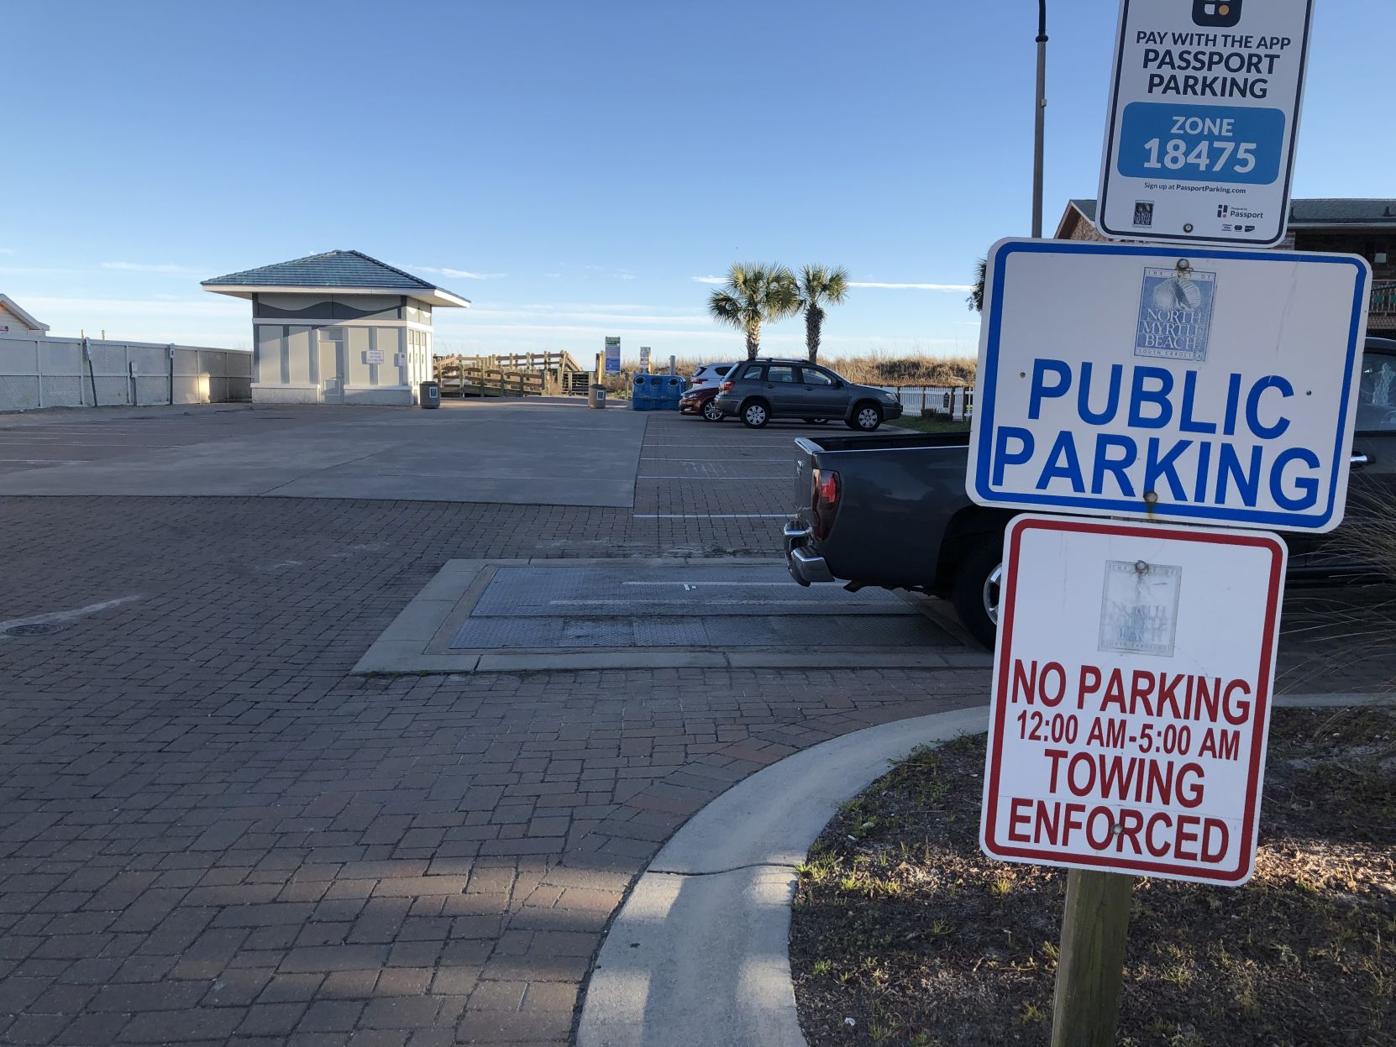 Angry Reaction to Cherry Creek Shopping Center Paid Parking Change